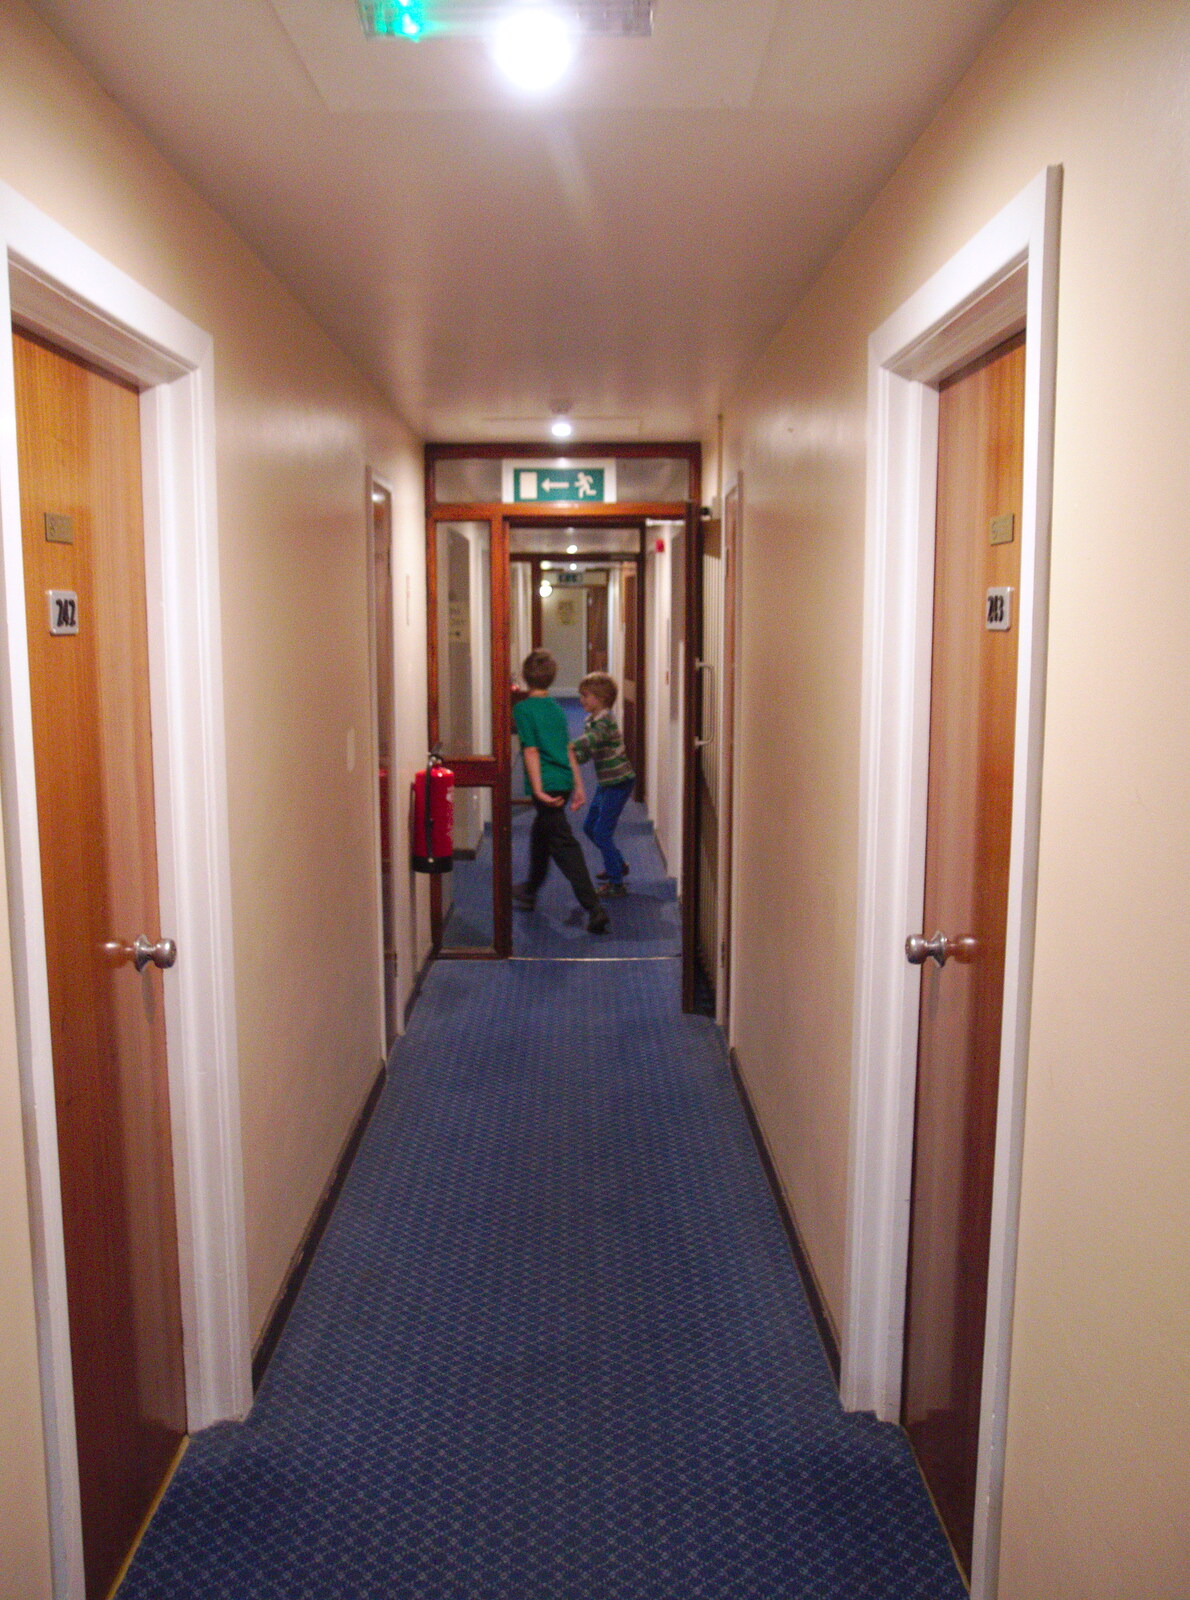 Back upstairs near the room from The Summer Trip to Ireland, Monkstown, Co. Dublin, Ireland - 9th August 2019